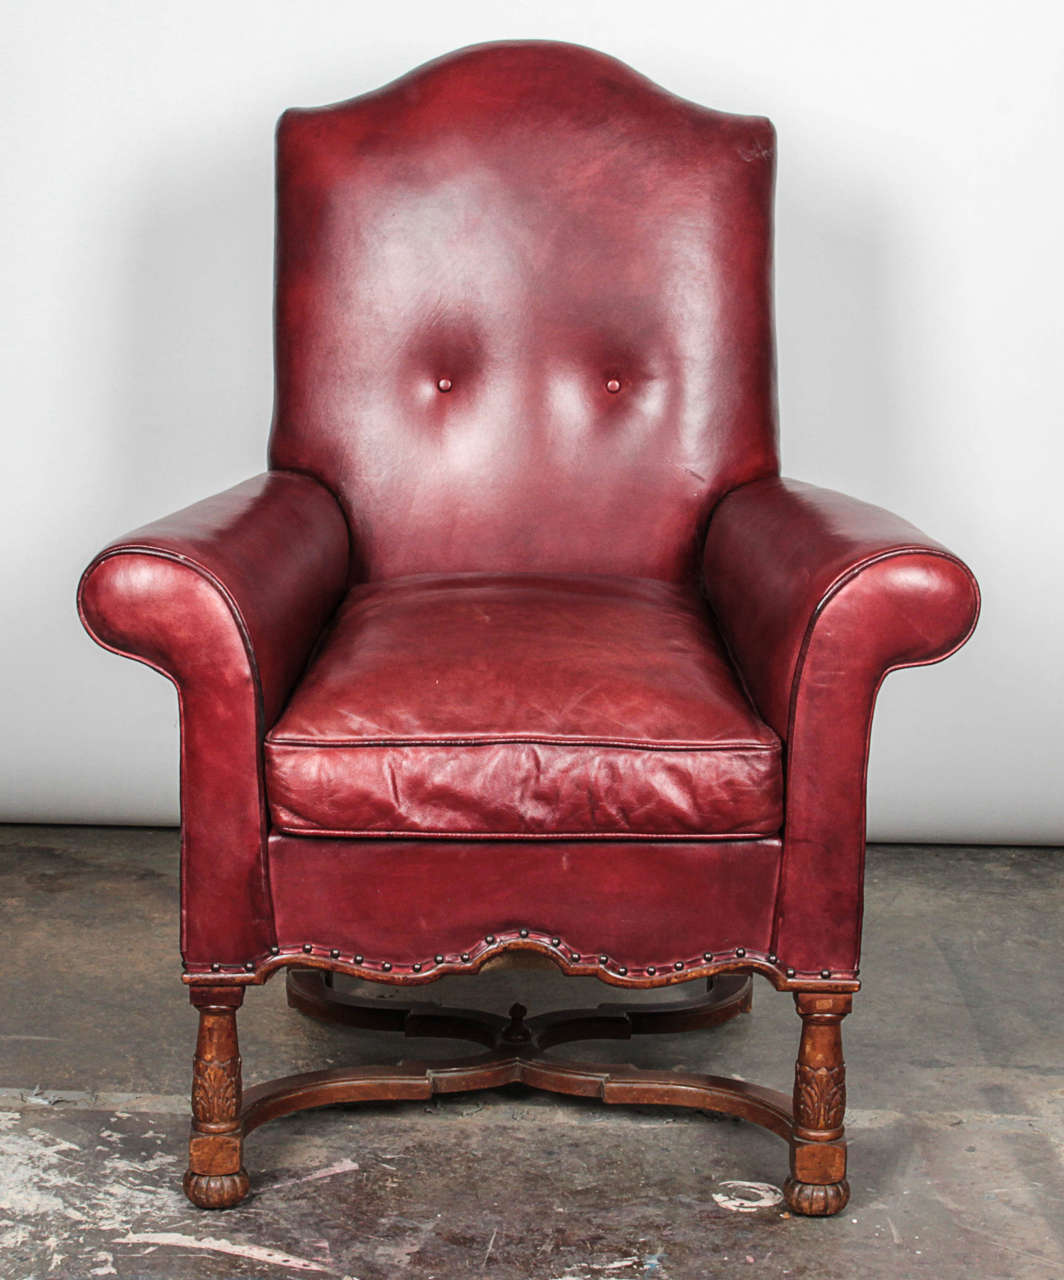 Beautiful leather chair with arched backrest, loose seat cushion flanked by out-scrolled arms, shaped rail with brass tack trim, over blocked, turned and acanthus-carved stretchered legs. Wooden finial on underside of chair is worn.

Not available